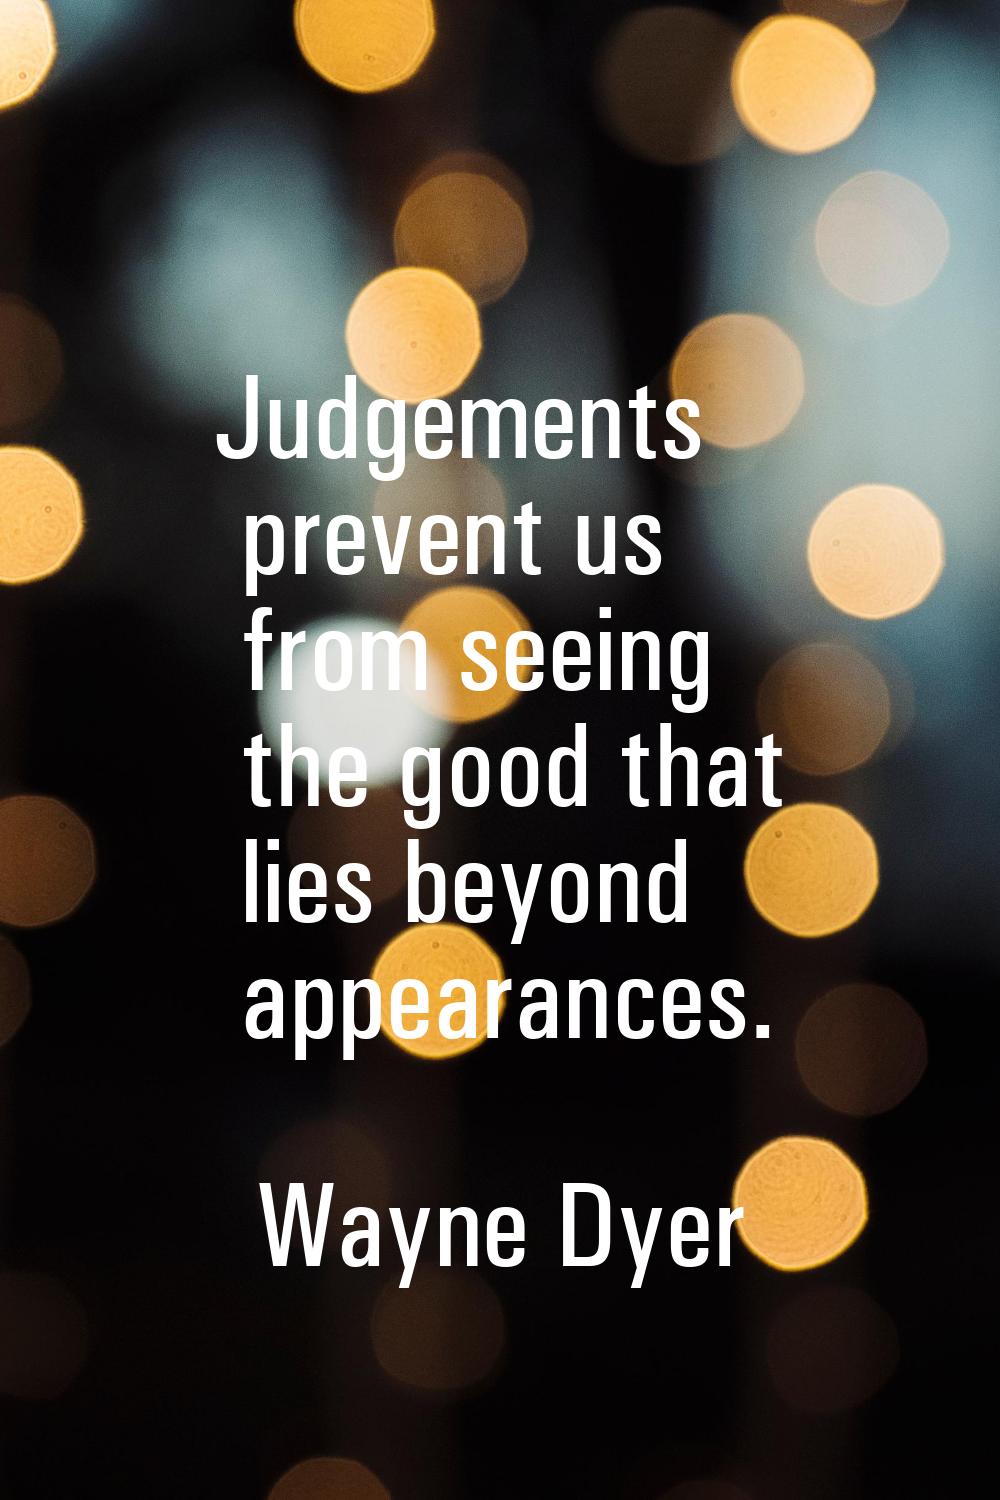 Judgements prevent us from seeing the good that lies beyond appearances.